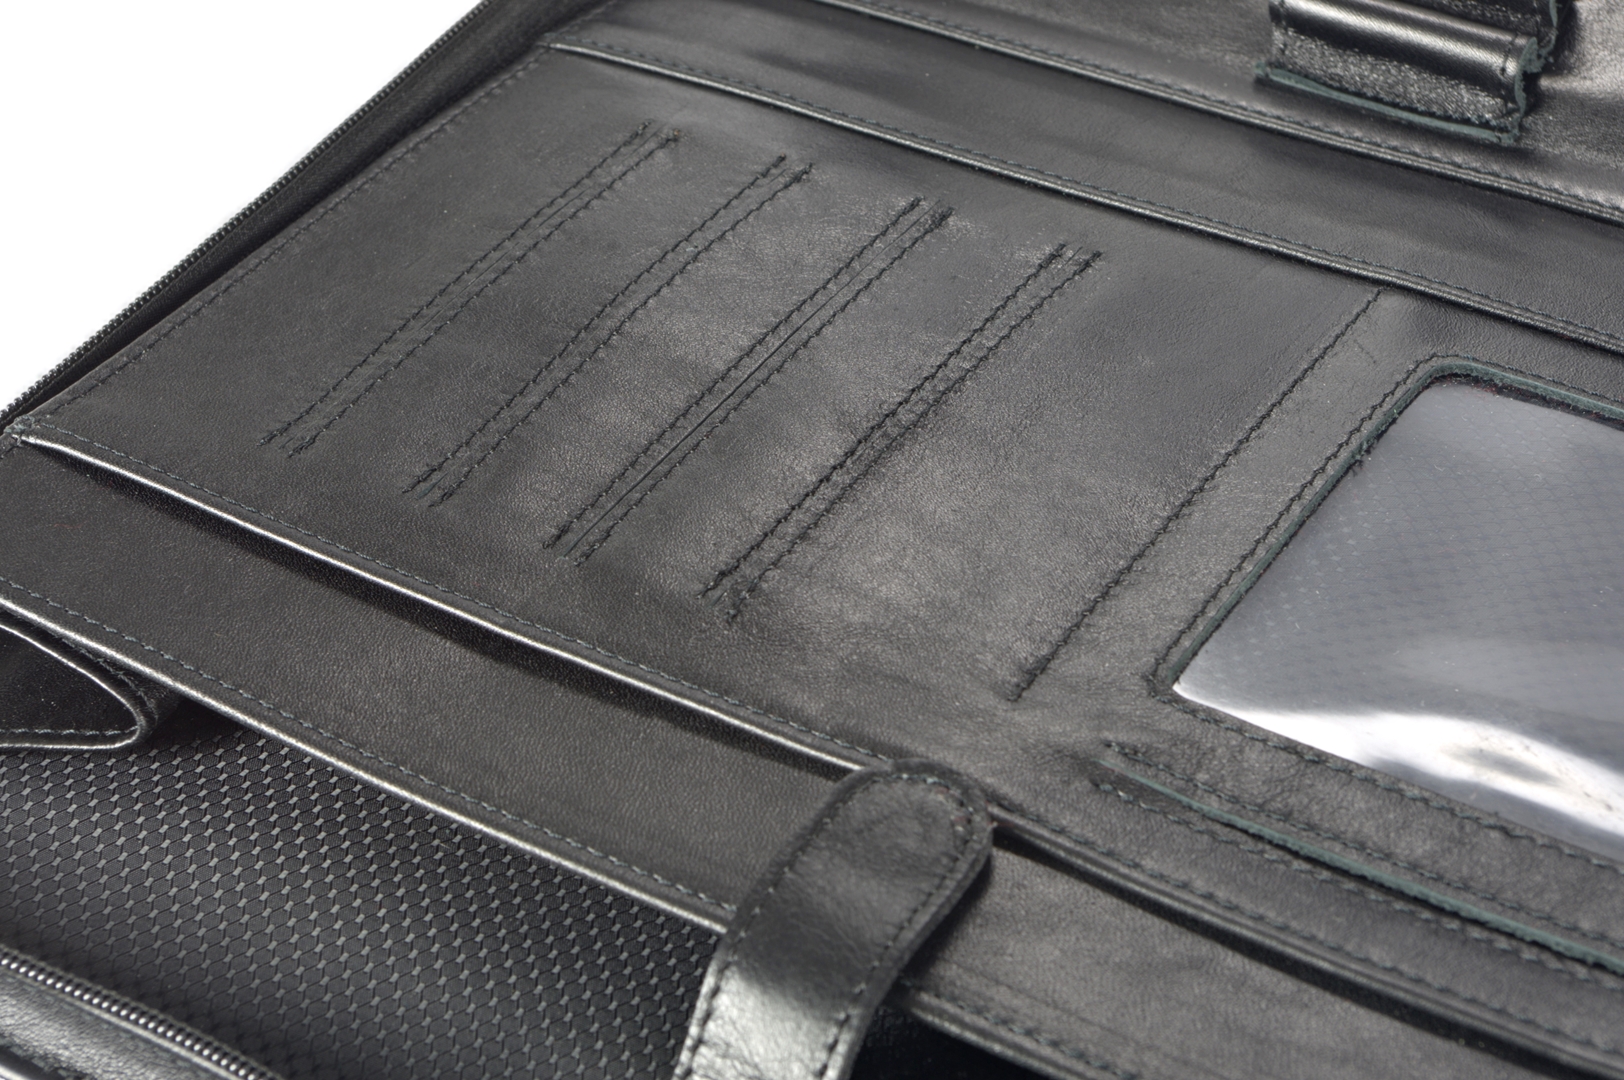 A4 zippered conference folder made of genuine leather. 19 BL 0-1F